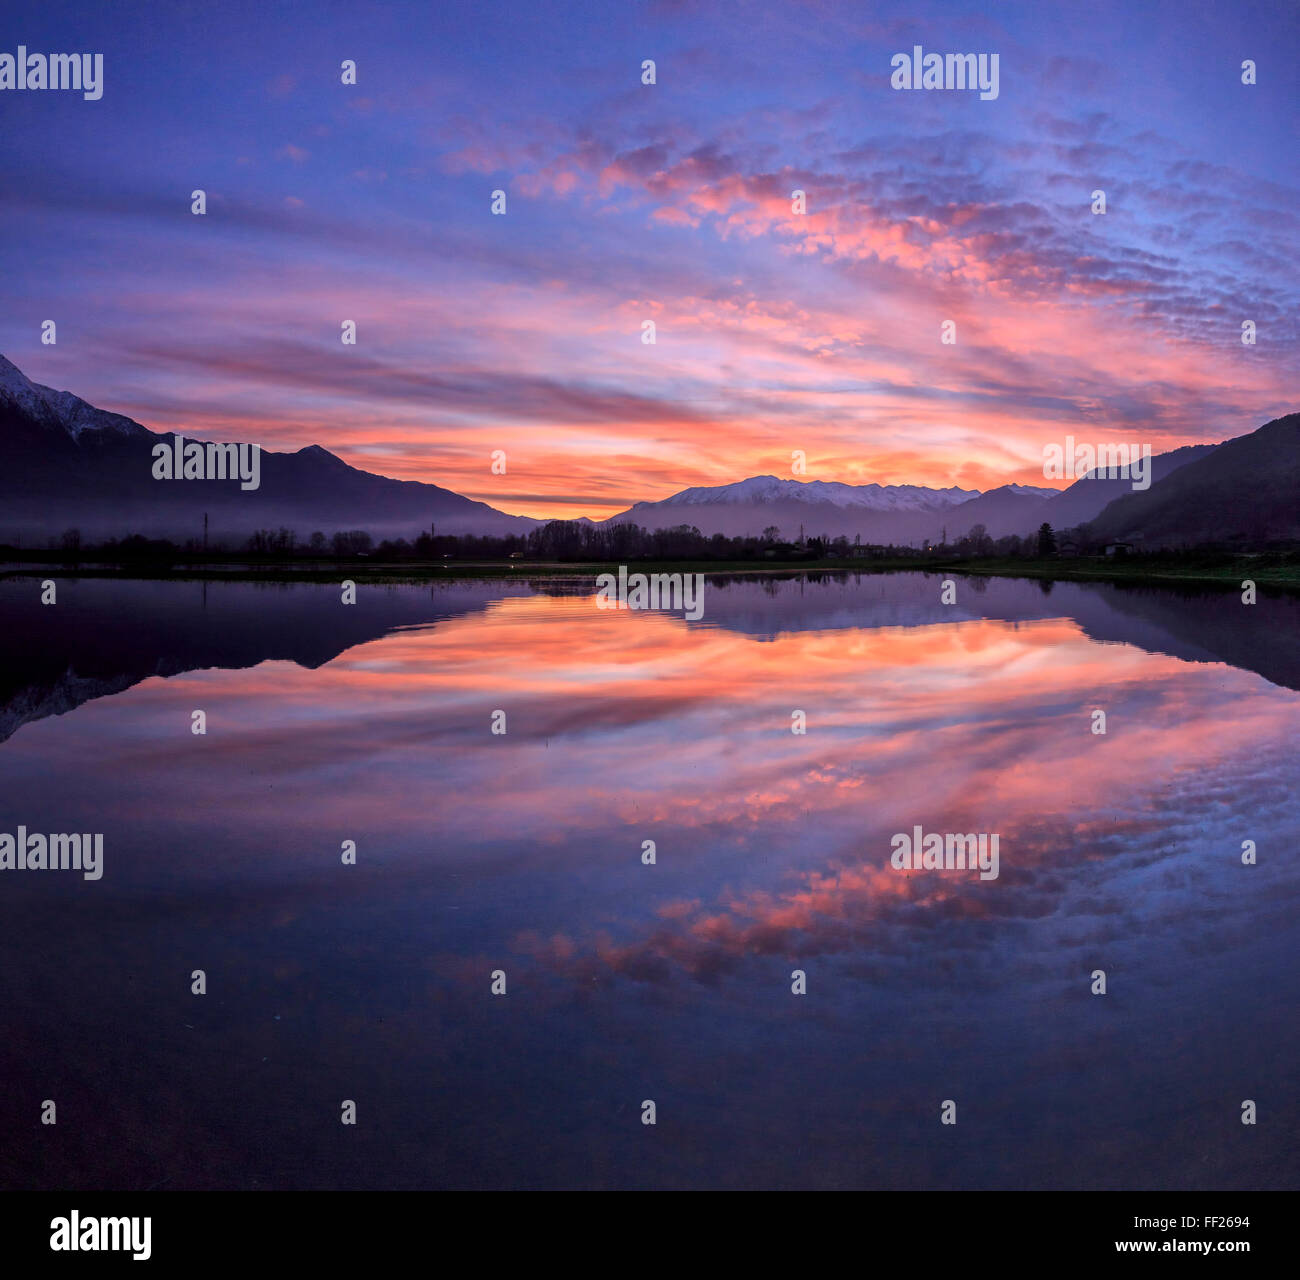 Panoramic view of Pian di Spagna flooded with snowy peaks reflected in the water at sunset, Valtellina, Lombardy, Italy, Europe Stock Photo